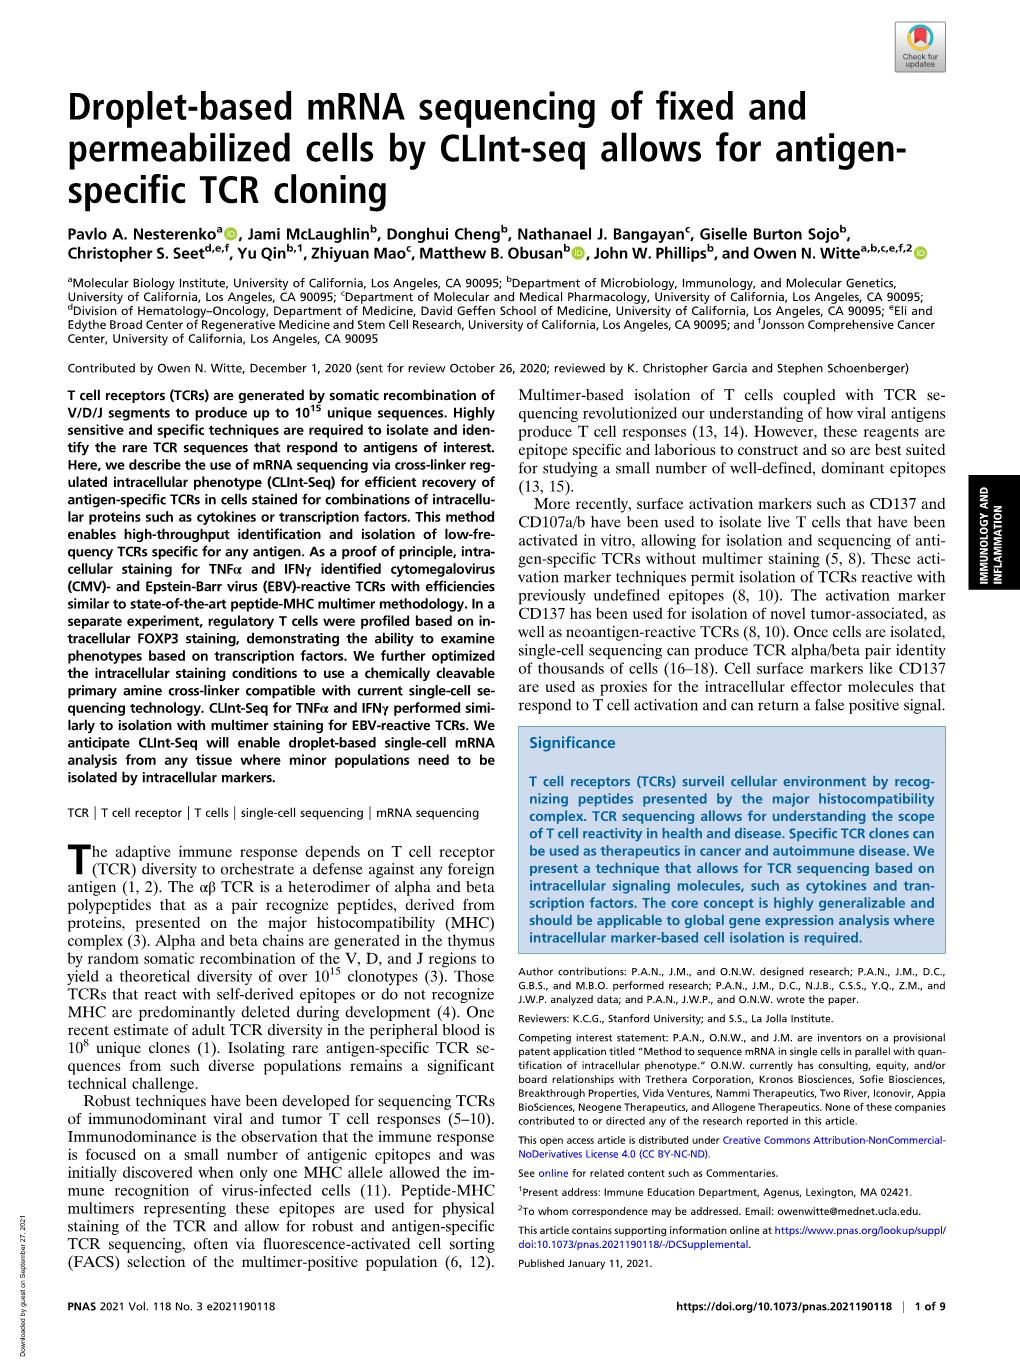 Droplet-Based Mrna Sequencing of Fixed and Permeabilized Cells by Clint-Seq Allows for Antigen- Specific TCR Cloning